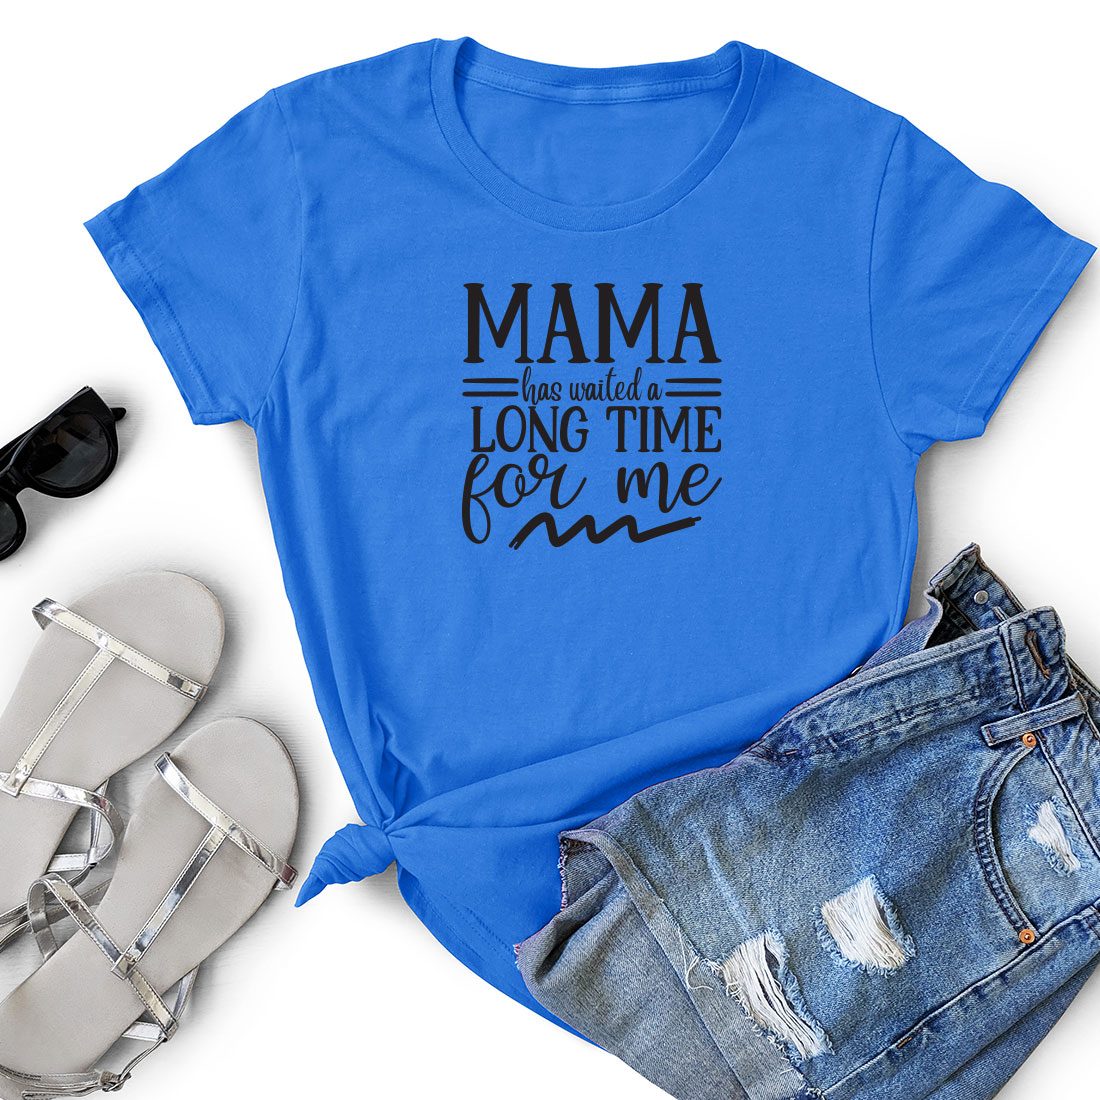 T - shirt that says mama is not a long time for me.